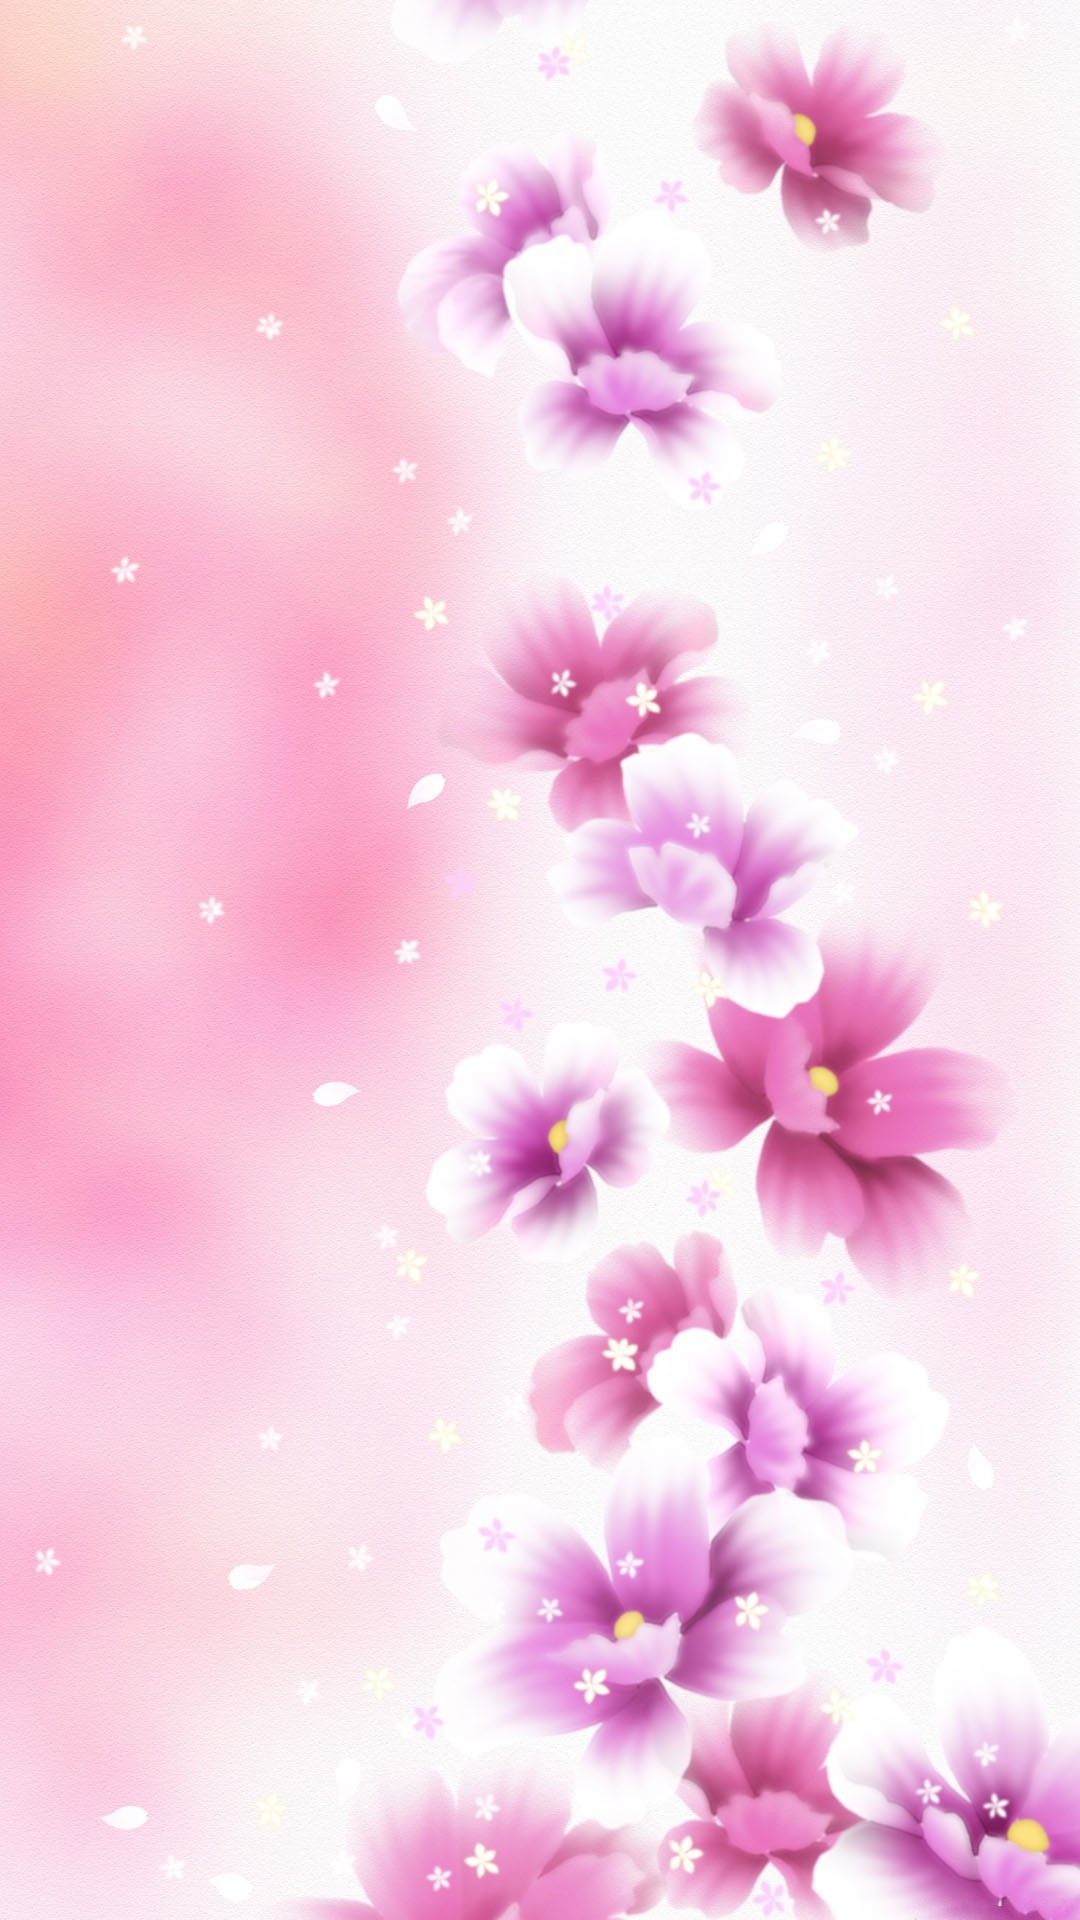 1080x1920 Girly Wallpapers Pink Desktops Lovely Ipad Ipod Smartphone Backgrounds